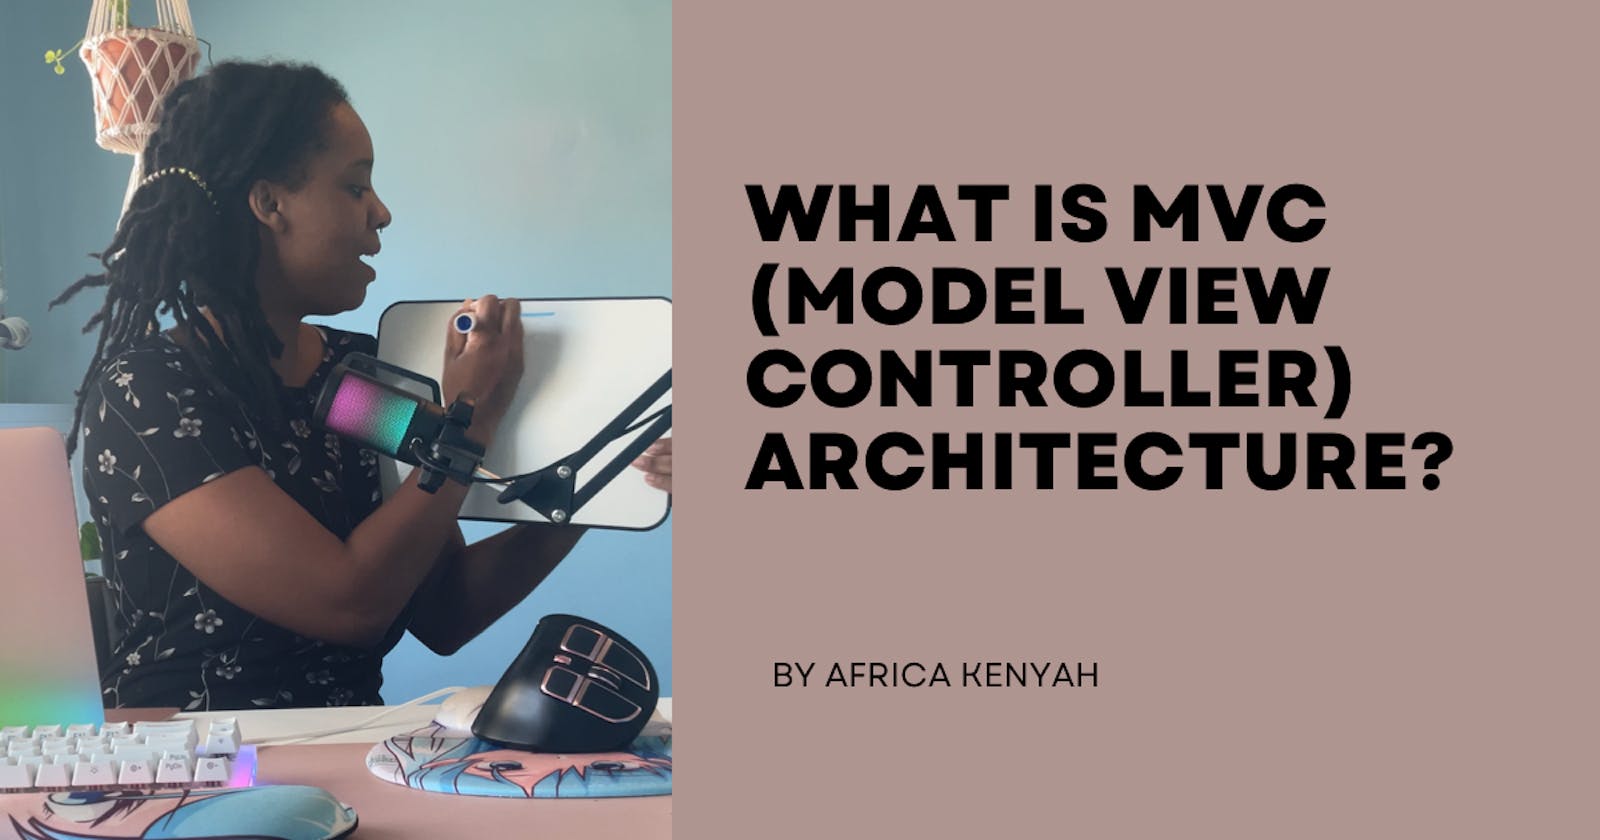 What is MVC (Model View Controller) Architecture?